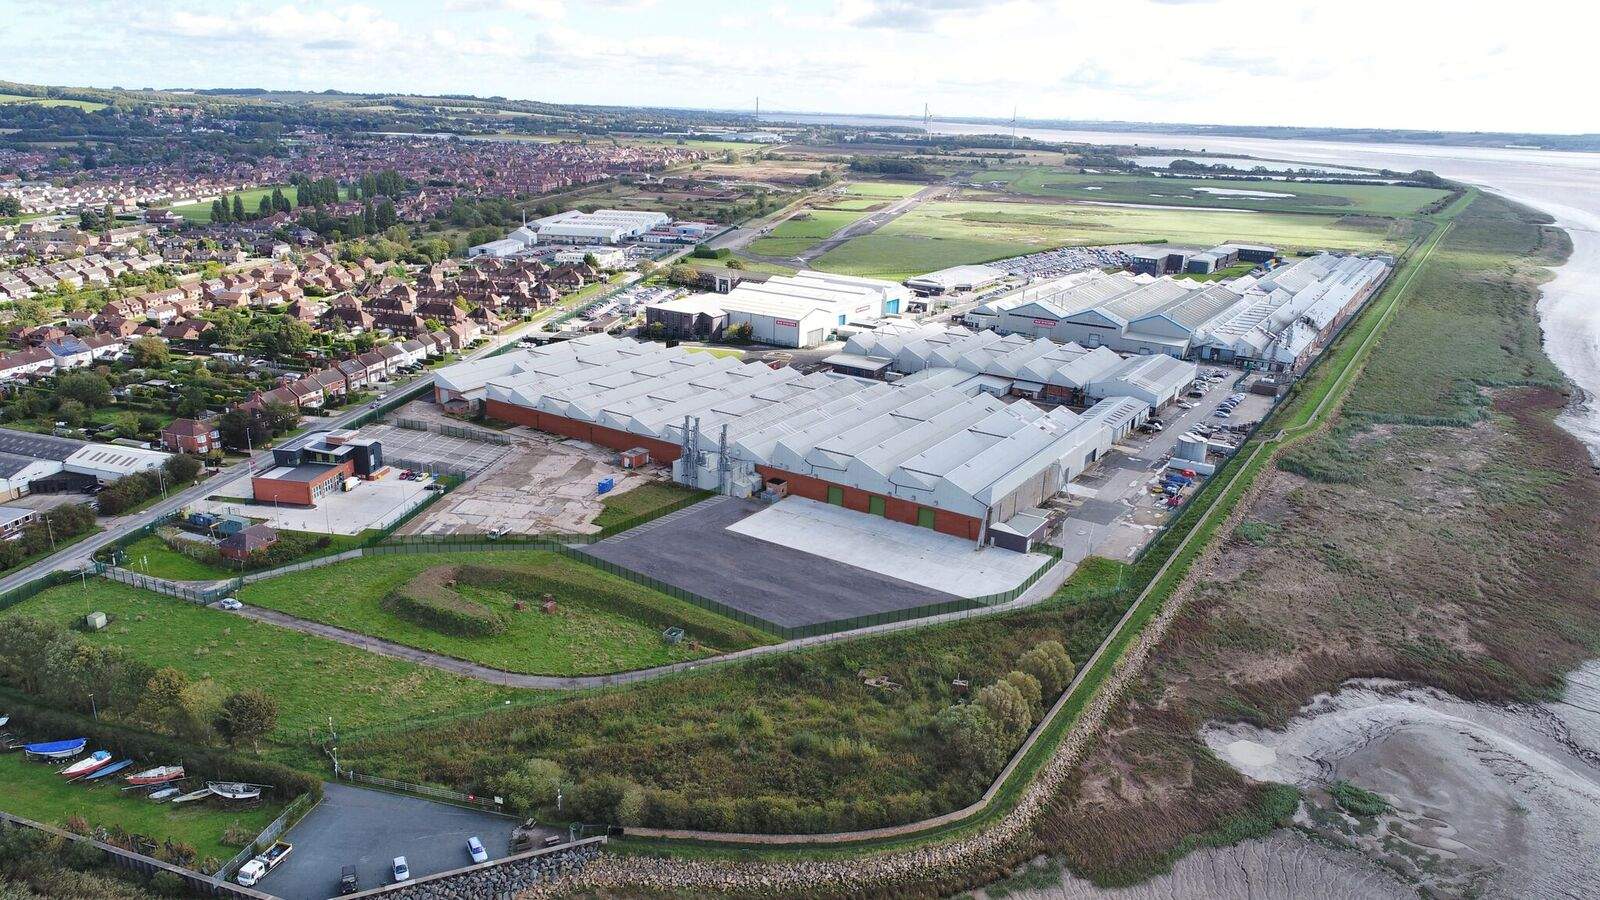 BRIGHT FUTURE FOR HUMBER ENTERPRISE PARK AFTER BLUE-CHIP COMPANY AGREES SIX-YEAR DEAL